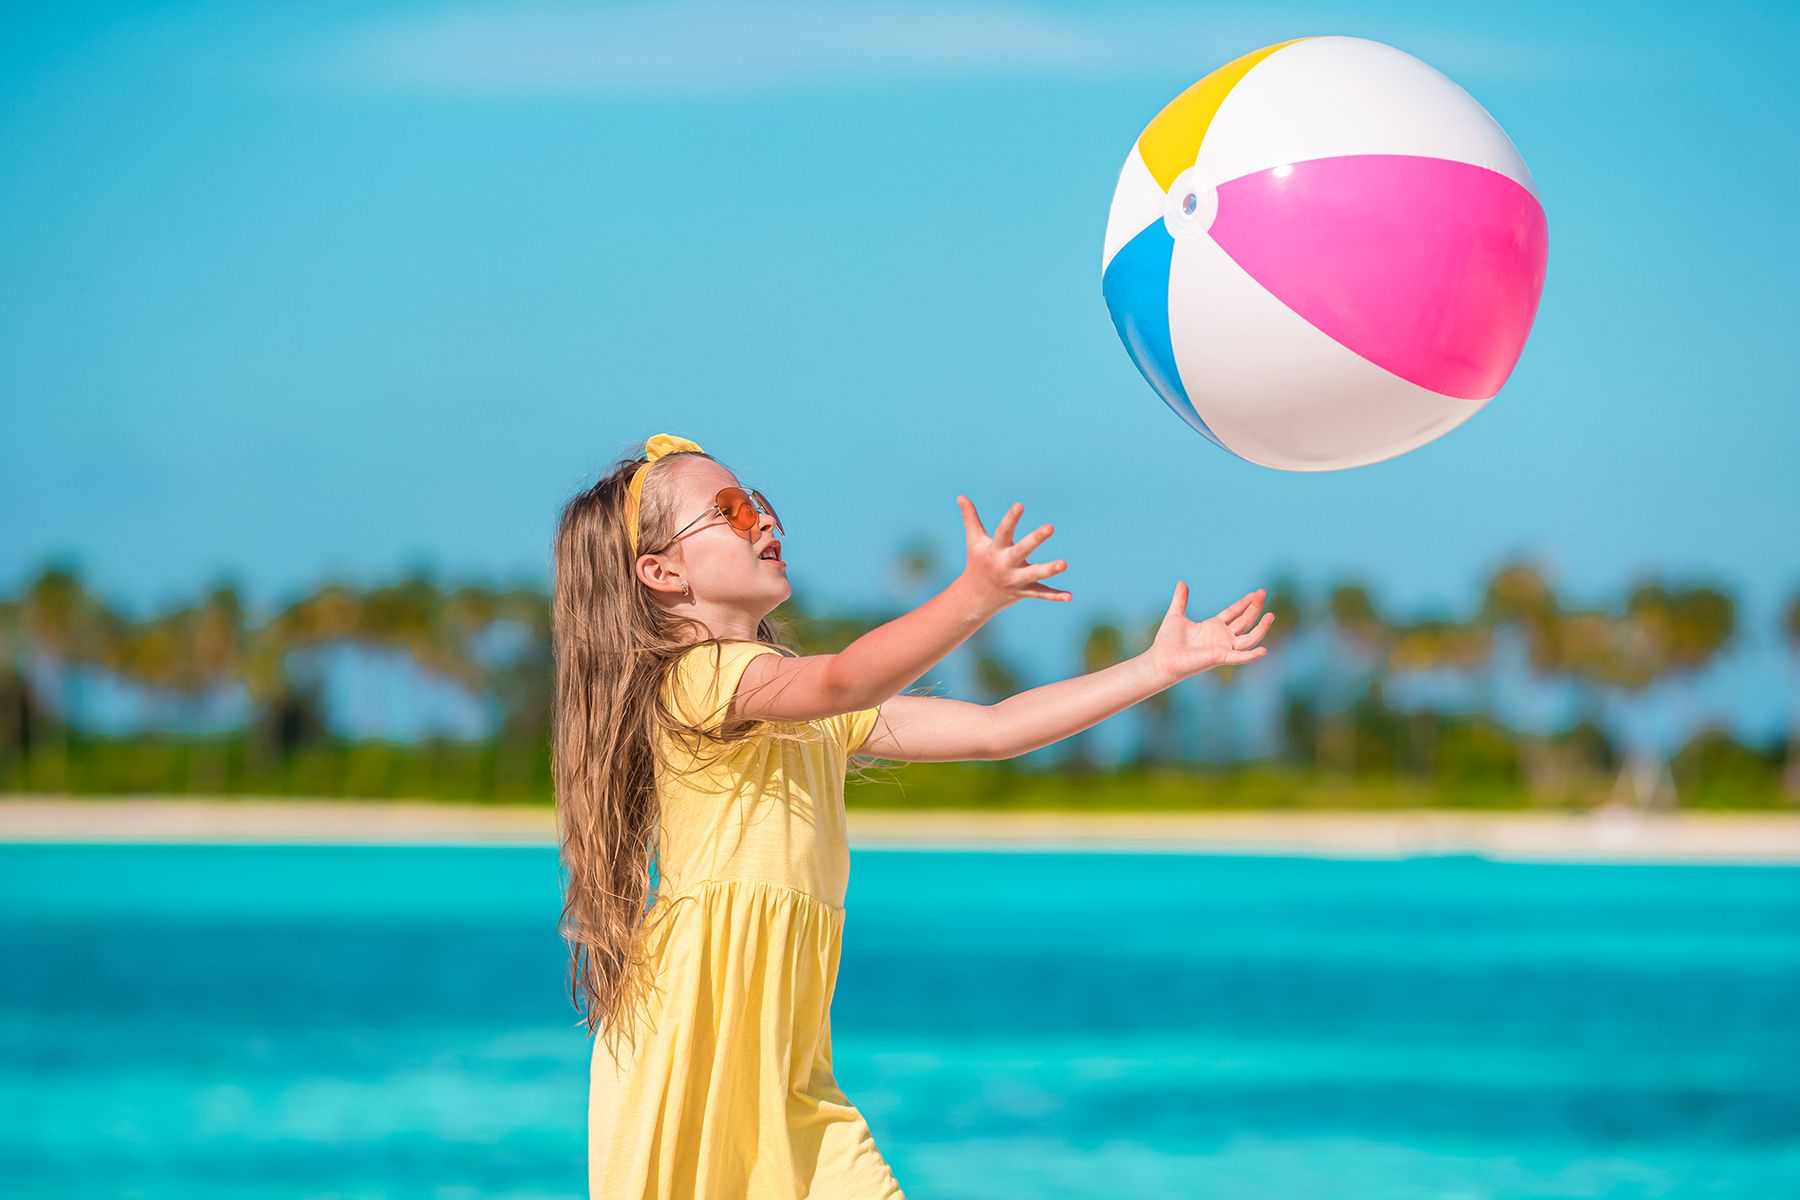 Crazy Beach ball game  Beach party games, Luau party games, Birthday party  for teens